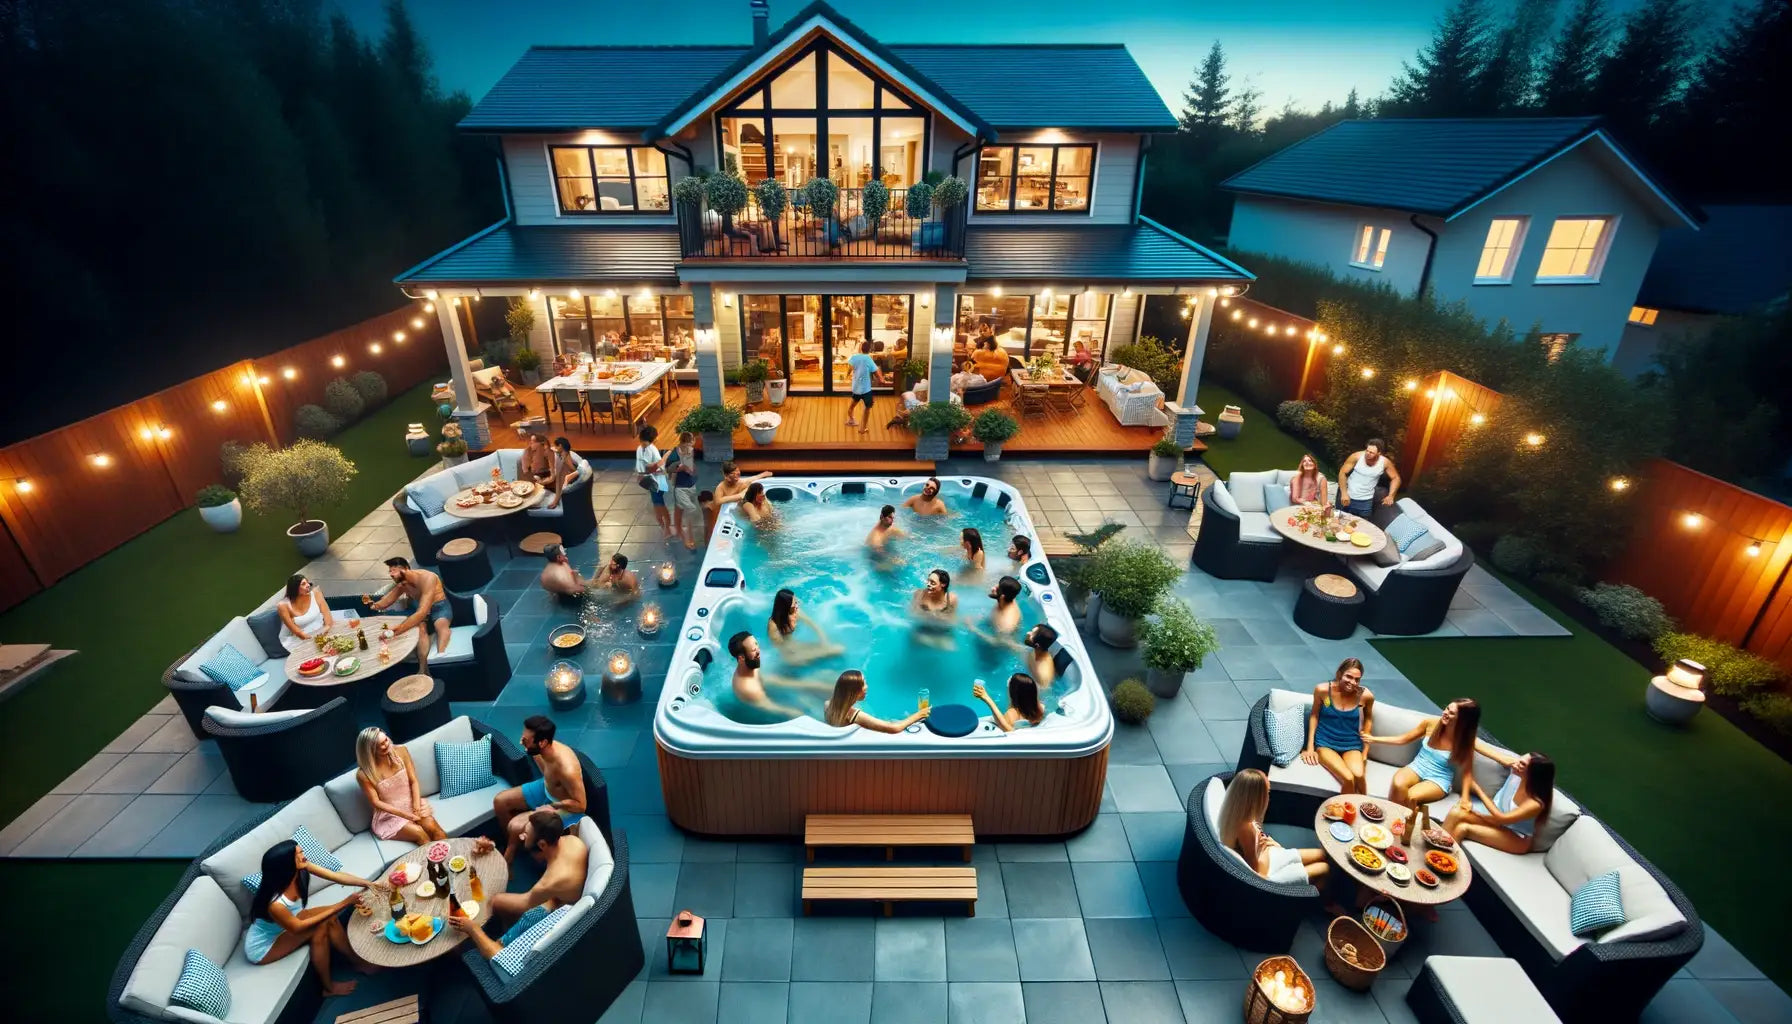 well-lit backyard during dusk with a spacious hot tub. Diverse groups of people are chatting and laughing while enjoying the warm water.